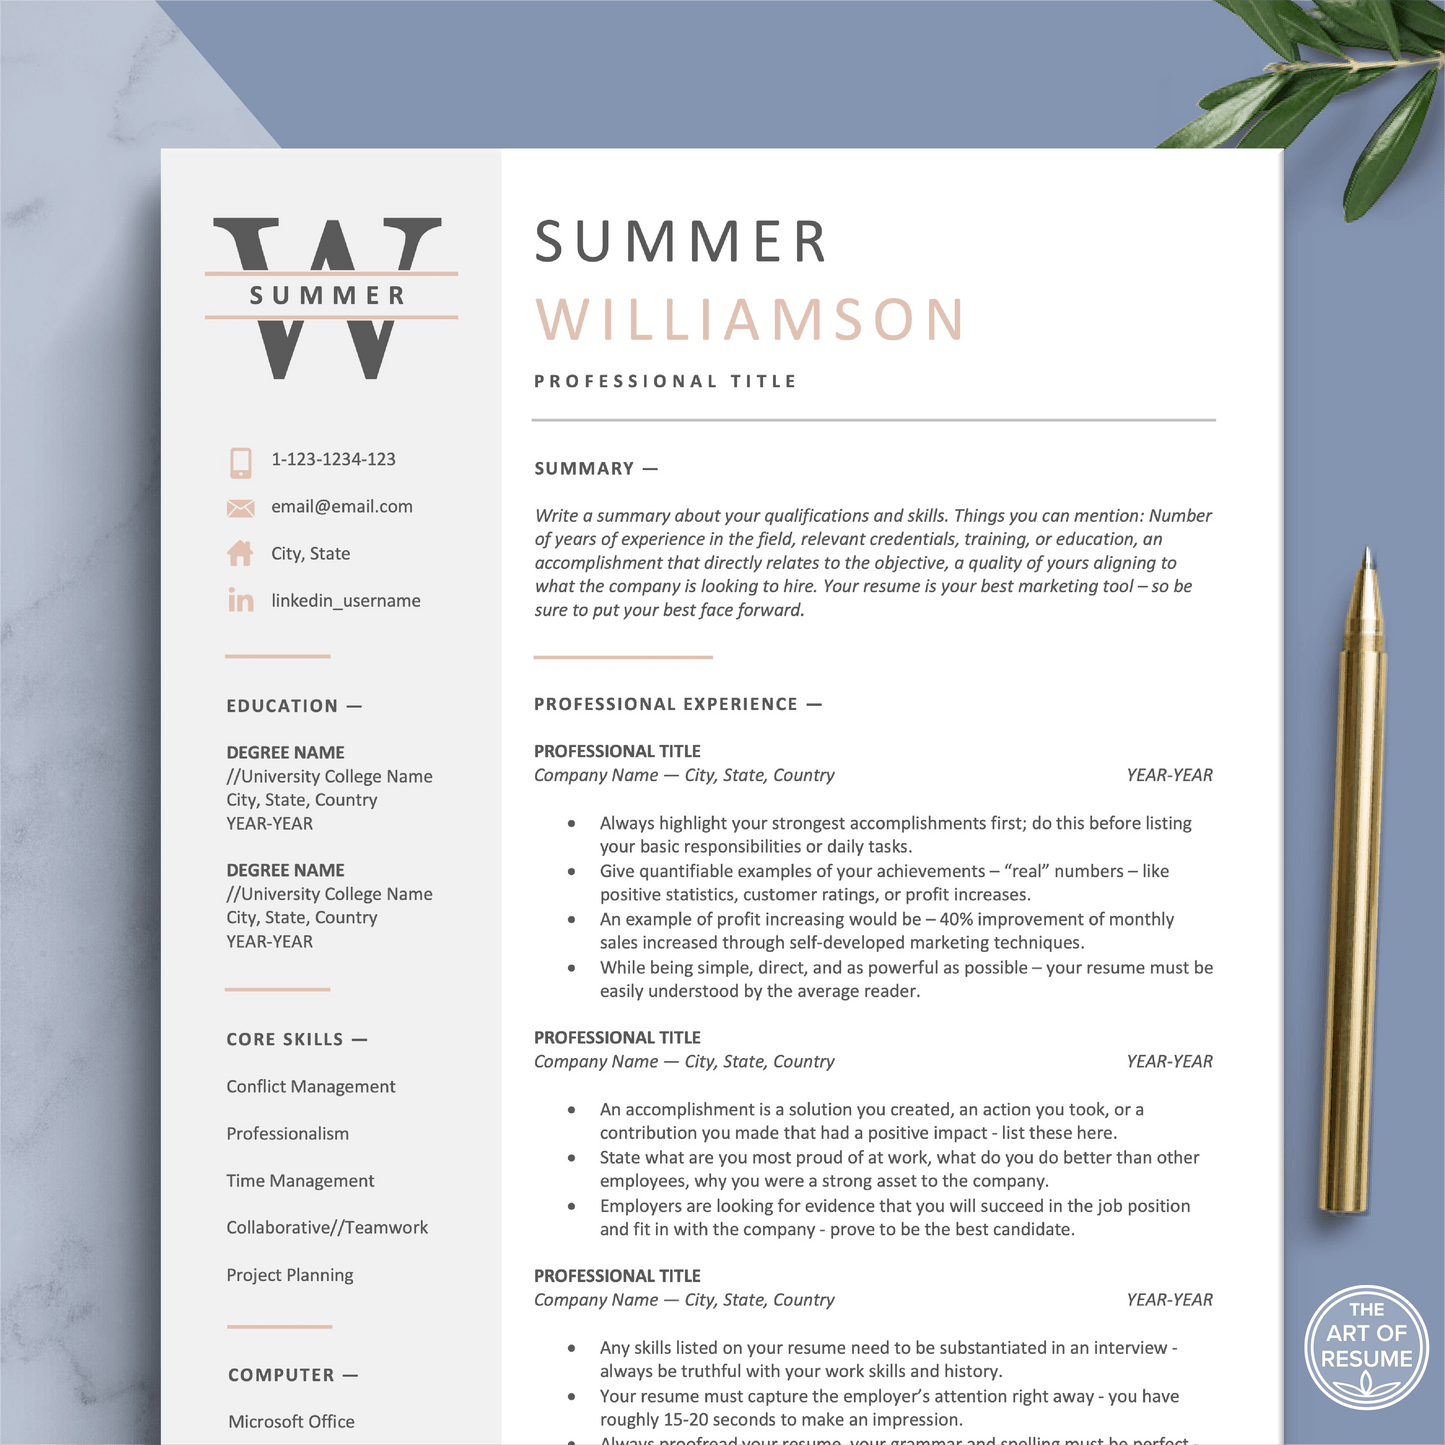 The Art of Resume Templates | Professional Pink and Grey Resume CV Template | Curriculum Vitae for Apple Pages, Microsoft Word, Mac, PC